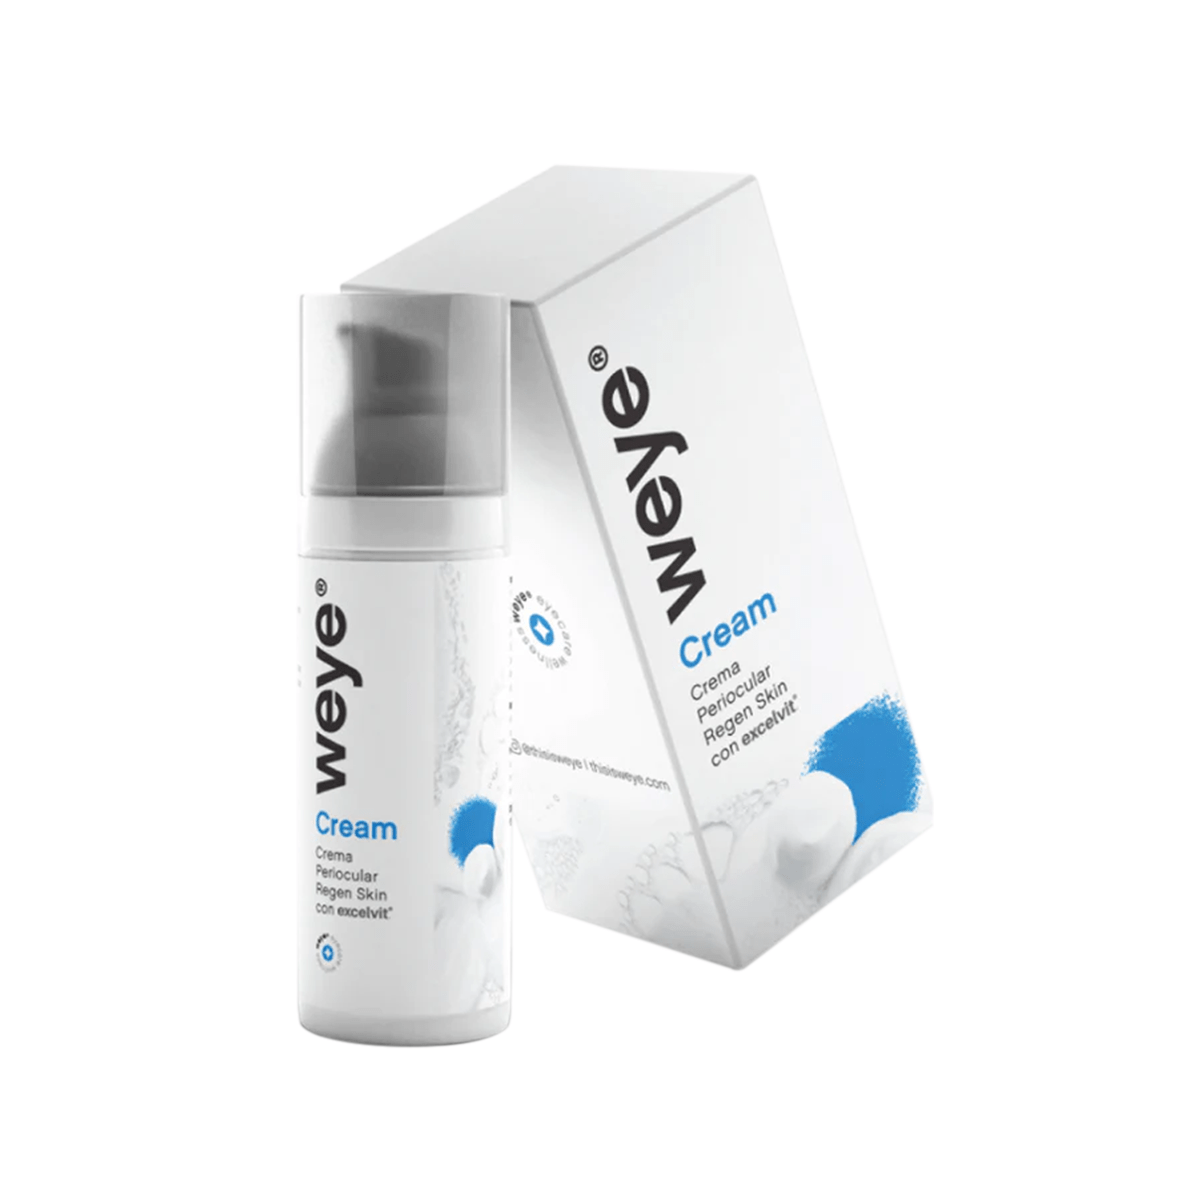 Weye Eye and Facial Cream with Excelvit (50mL) - Dryeye Rescue